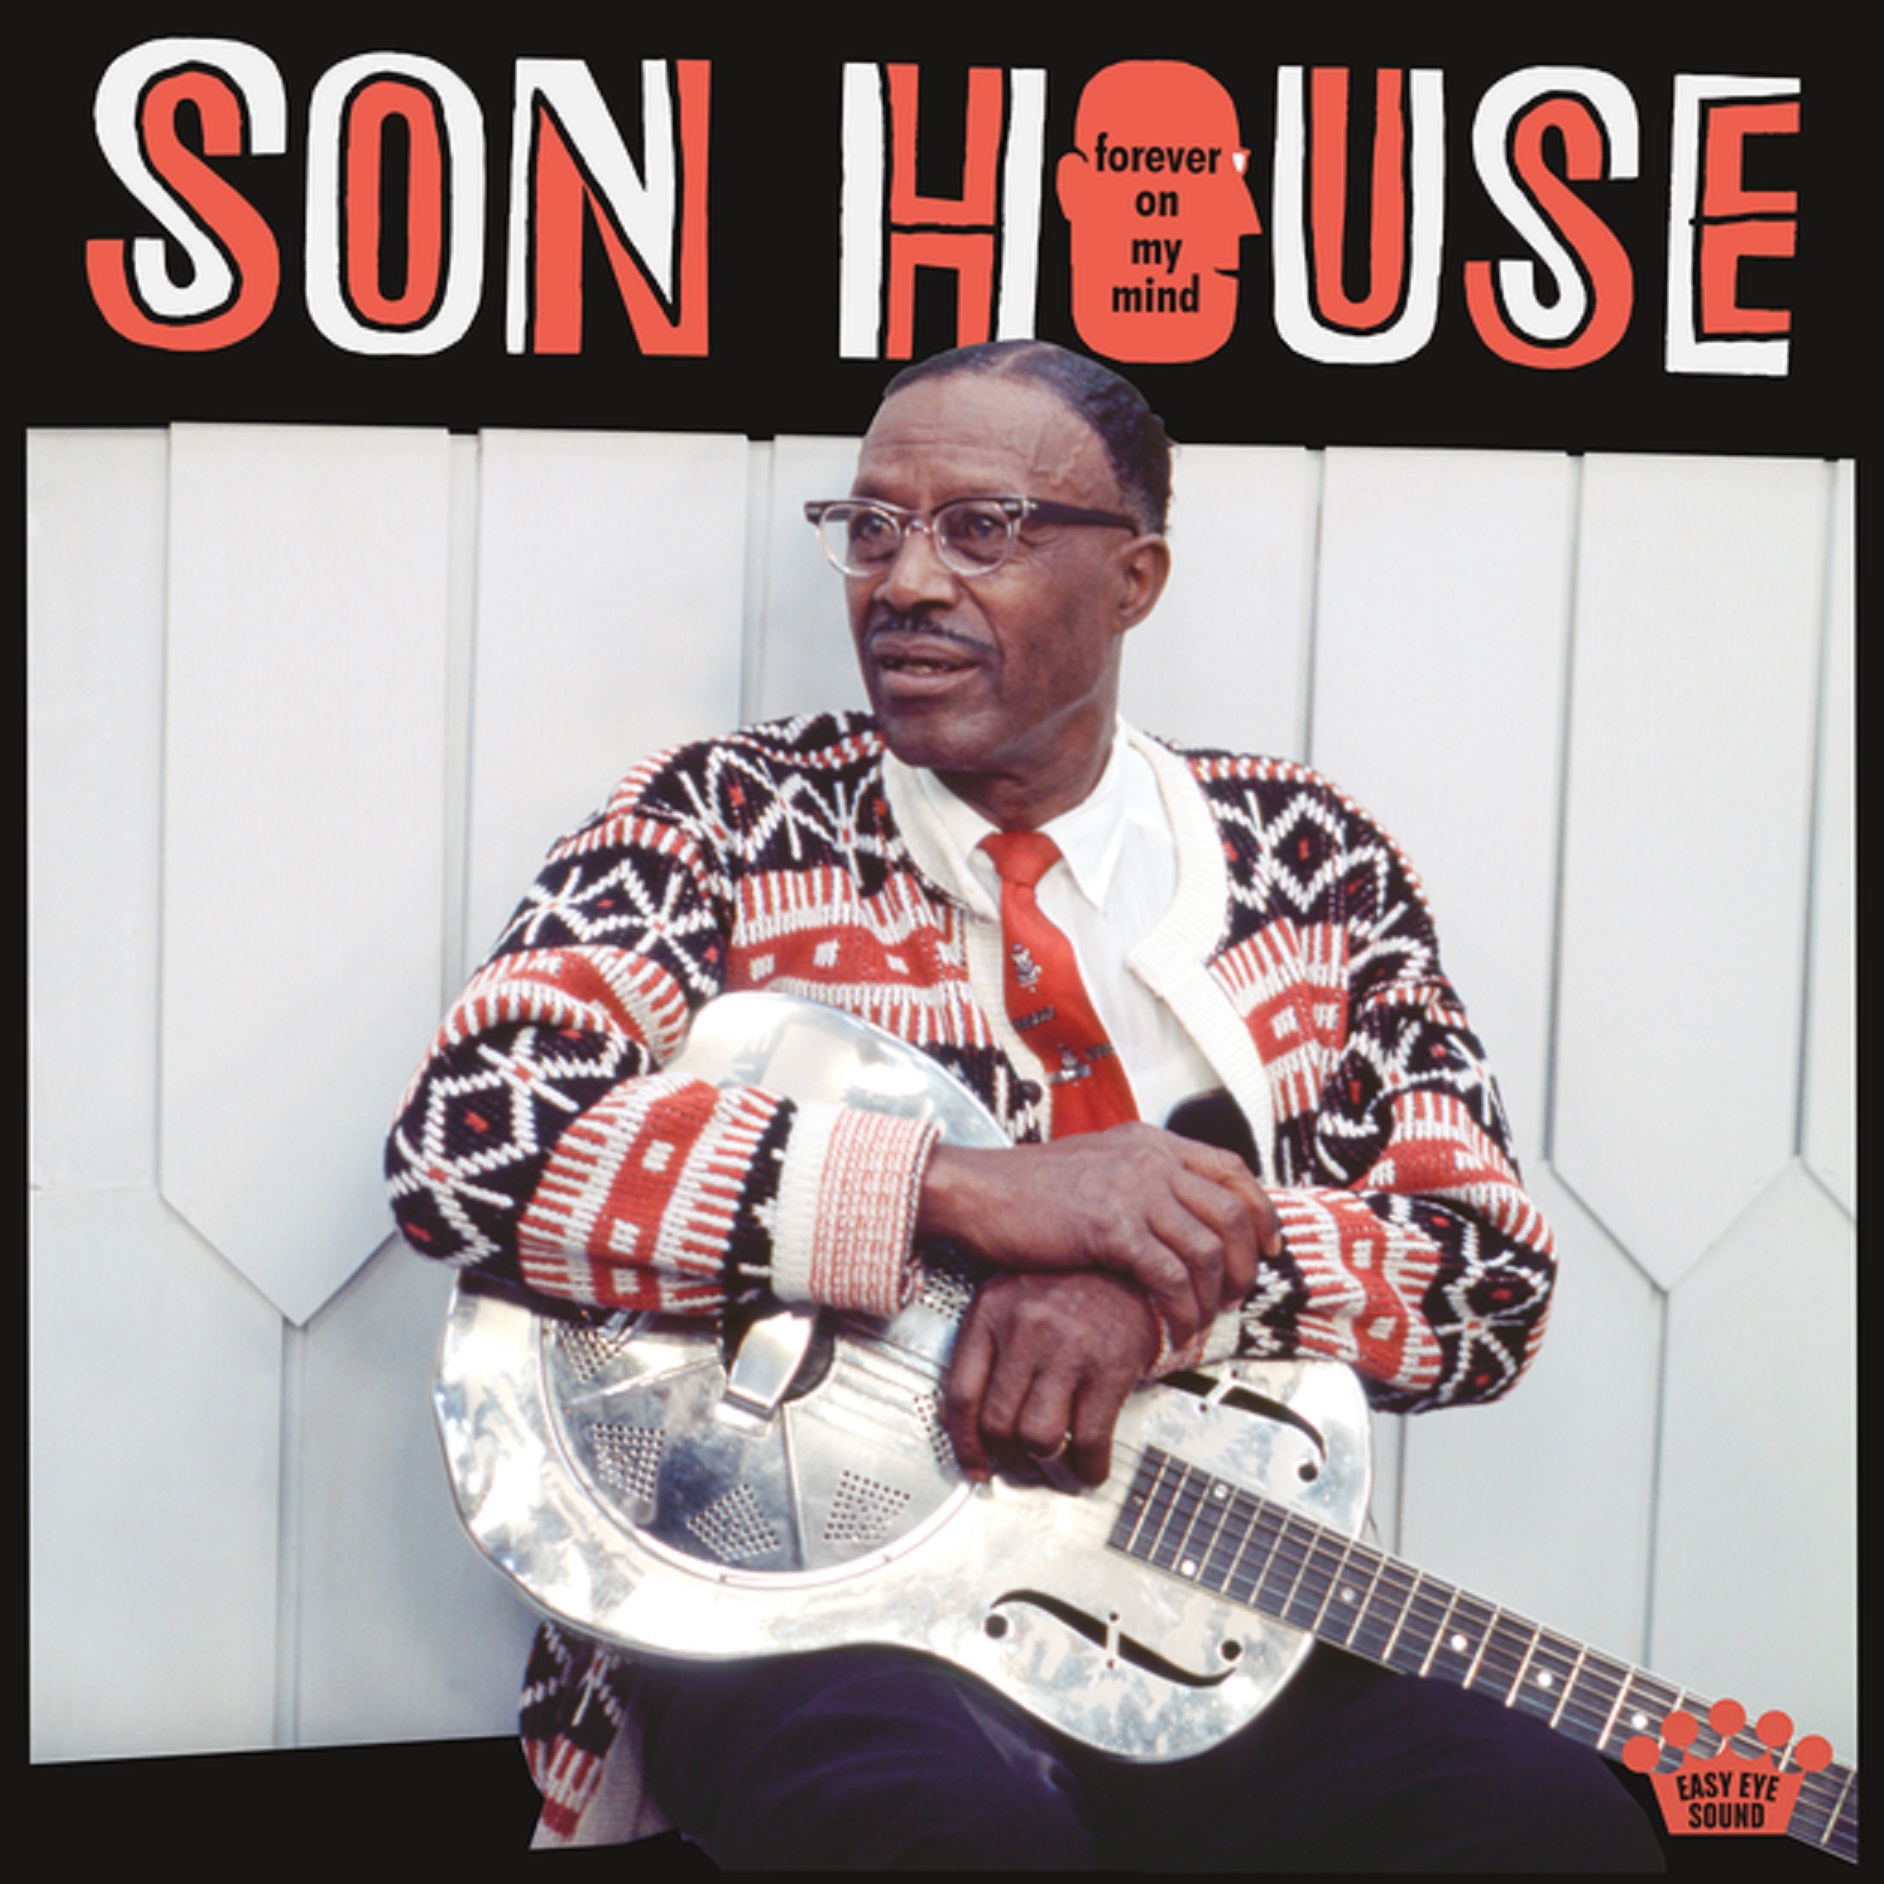 Father of Delta Blues Son House's unheard music, 'Forever On My Mind',' out on Easy Eye Sound